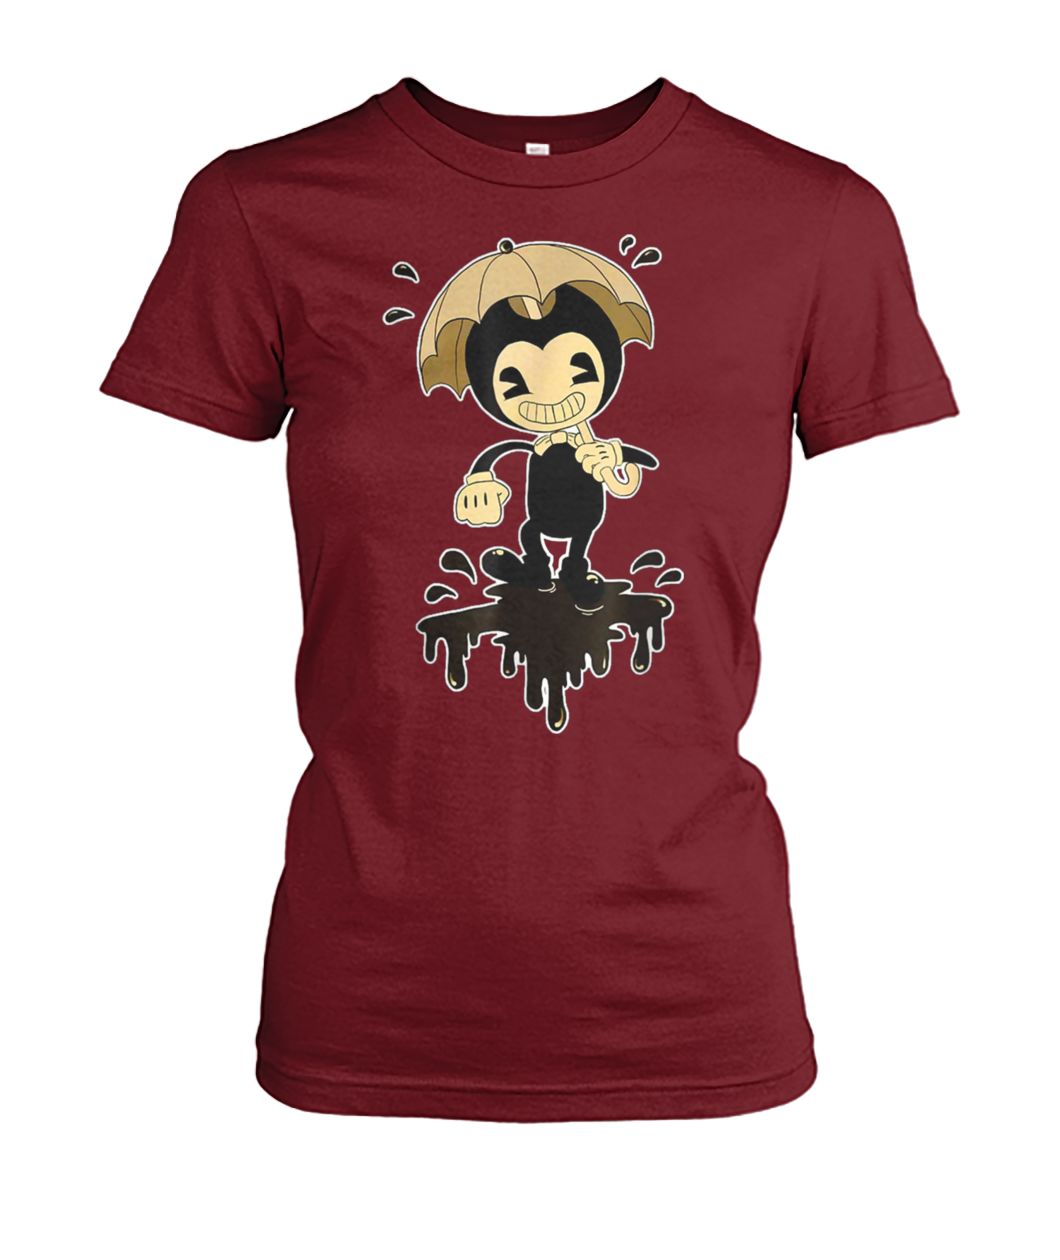 Video game inspired bendy and the ink machine women's crew tee